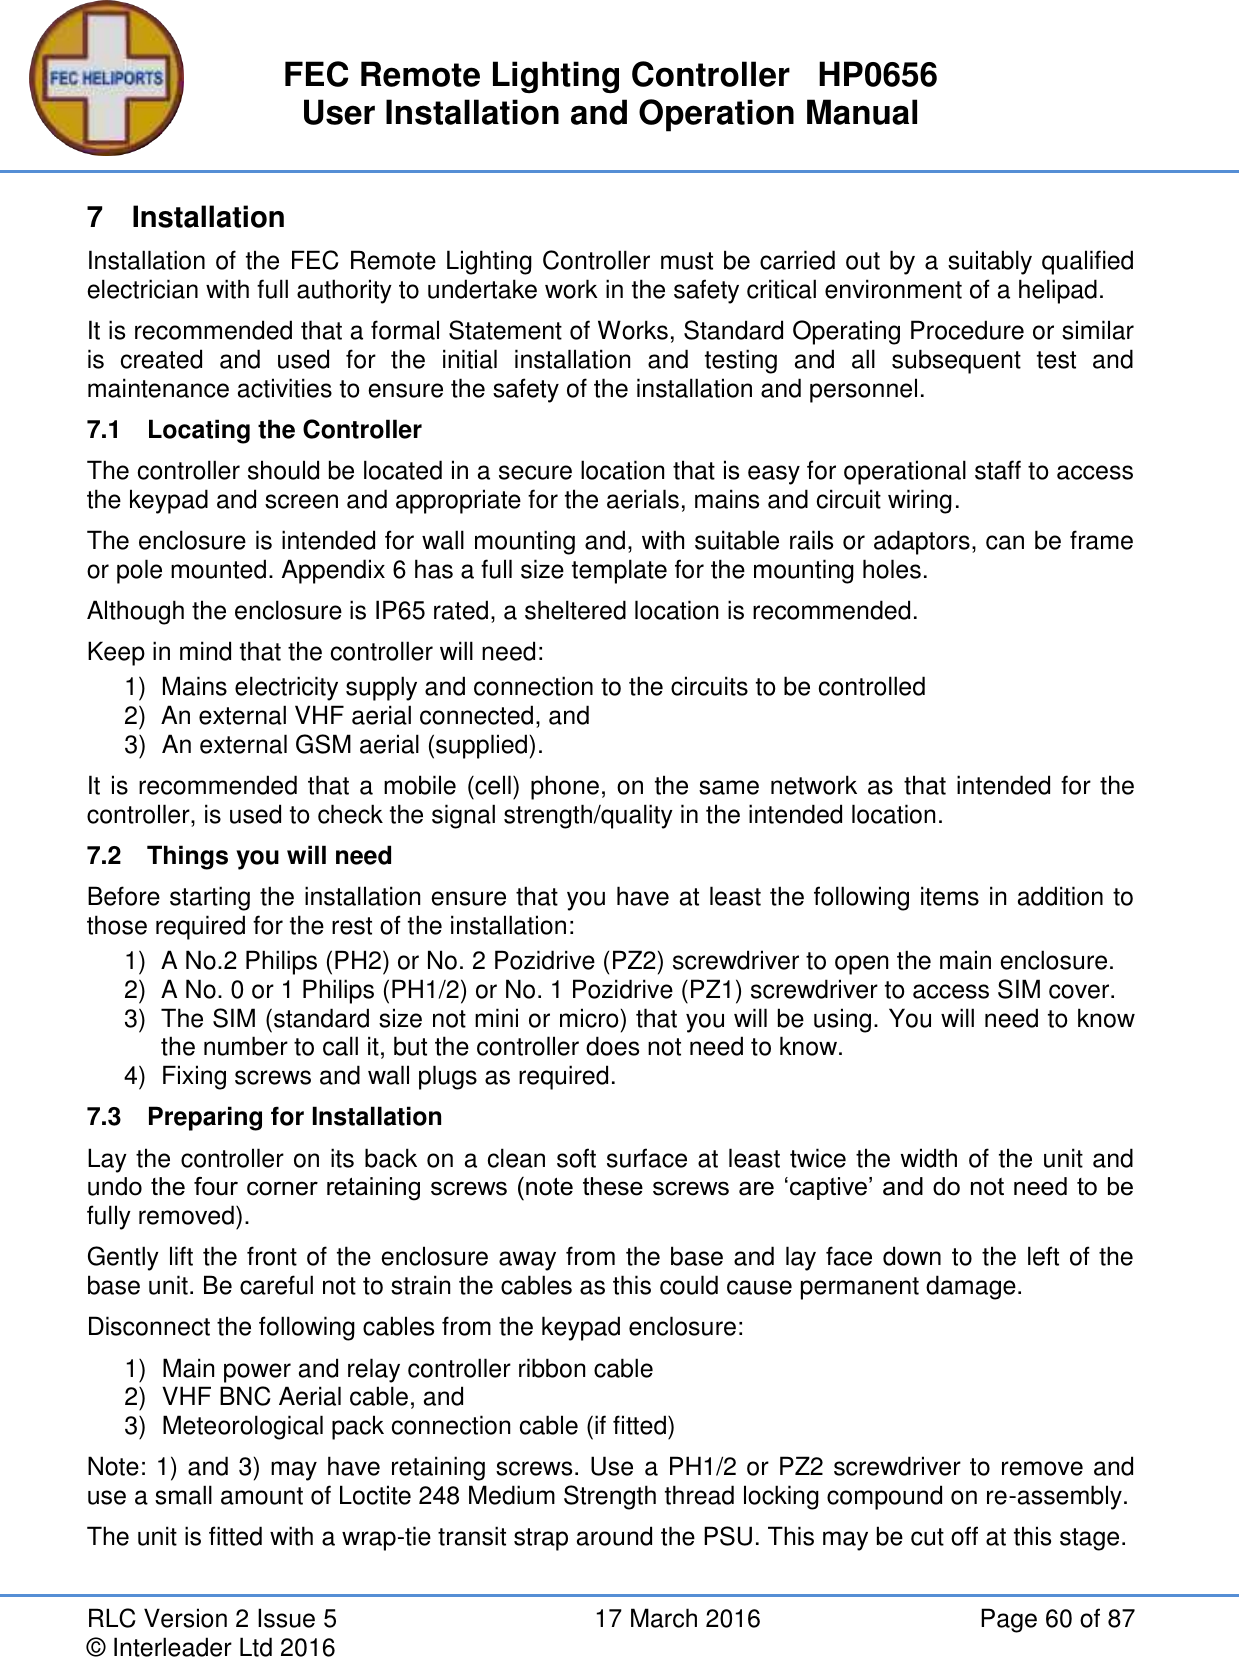 FEC Remote Lighting Controller   HP0656 User Installation and Operation Manual RLC Version 2 Issue 5  17 March 2016  Page 60 of 87 © Interleader Ltd 2016 7  Installation Installation of the FEC Remote Lighting Controller must be carried out by a suitably qualified electrician with full authority to undertake work in the safety critical environment of a helipad. It is recommended that a formal Statement of Works, Standard Operating Procedure or similar is  created  and  used  for  the  initial  installation  and  testing  and  all  subsequent  test  and maintenance activities to ensure the safety of the installation and personnel. 7.1  Locating the Controller The controller should be located in a secure location that is easy for operational staff to access the keypad and screen and appropriate for the aerials, mains and circuit wiring. The enclosure is intended for wall mounting and, with suitable rails or adaptors, can be frame or pole mounted. Appendix 6 has a full size template for the mounting holes.  Although the enclosure is IP65 rated, a sheltered location is recommended. Keep in mind that the controller will need: 1)  Mains electricity supply and connection to the circuits to be controlled  2)  An external VHF aerial connected, and 3)  An external GSM aerial (supplied). It is recommended that a mobile (cell) phone, on the same network as that intended for the controller, is used to check the signal strength/quality in the intended location. 7.2  Things you will need Before starting the installation ensure that you have at least the following items in addition to those required for the rest of the installation: 1)  A No.2 Philips (PH2) or No. 2 Pozidrive (PZ2) screwdriver to open the main enclosure. 2)  A No. 0 or 1 Philips (PH1/2) or No. 1 Pozidrive (PZ1) screwdriver to access SIM cover. 3)  The SIM (standard size not mini or micro) that you will be using. You will need to know the number to call it, but the controller does not need to know. 4)  Fixing screws and wall plugs as required. 7.3  Preparing for Installation Lay the controller on its back on a clean soft surface at least twice the width of the unit and undo the four corner retaining screws (note these screws are ‘captive’ and do not need to be fully removed). Gently lift the front of the enclosure away from the base and lay face down to the left of the base unit. Be careful not to strain the cables as this could cause permanent damage. Disconnect the following cables from the keypad enclosure: 1)  Main power and relay controller ribbon cable 2)  VHF BNC Aerial cable, and 3)  Meteorological pack connection cable (if fitted) Note: 1) and 3) may have retaining screws. Use a PH1/2 or PZ2 screwdriver to remove and use a small amount of Loctite 248 Medium Strength thread locking compound on re-assembly. The unit is fitted with a wrap-tie transit strap around the PSU. This may be cut off at this stage. 